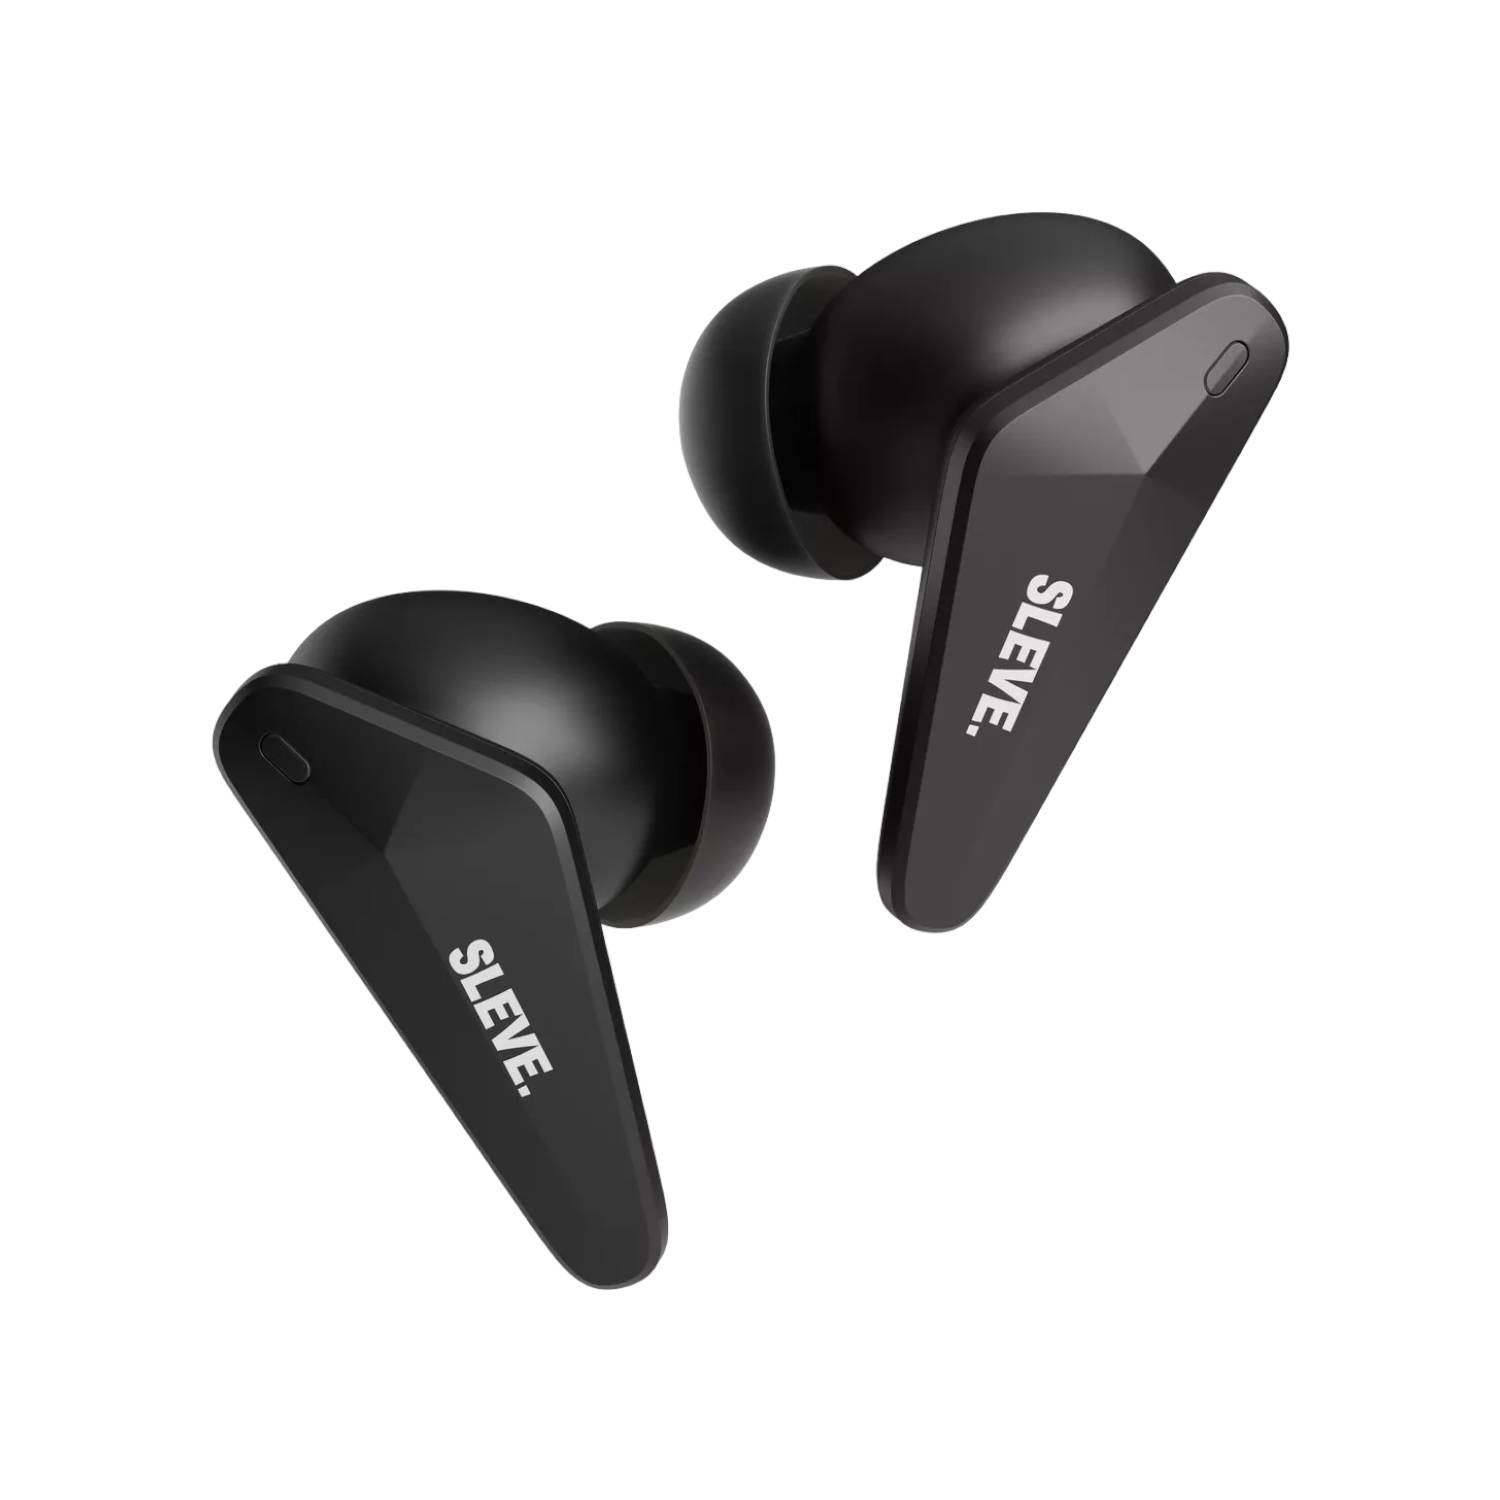 Auriculares Inalambricos Bluetooth Microfono Ipx4 Vention Color Negro